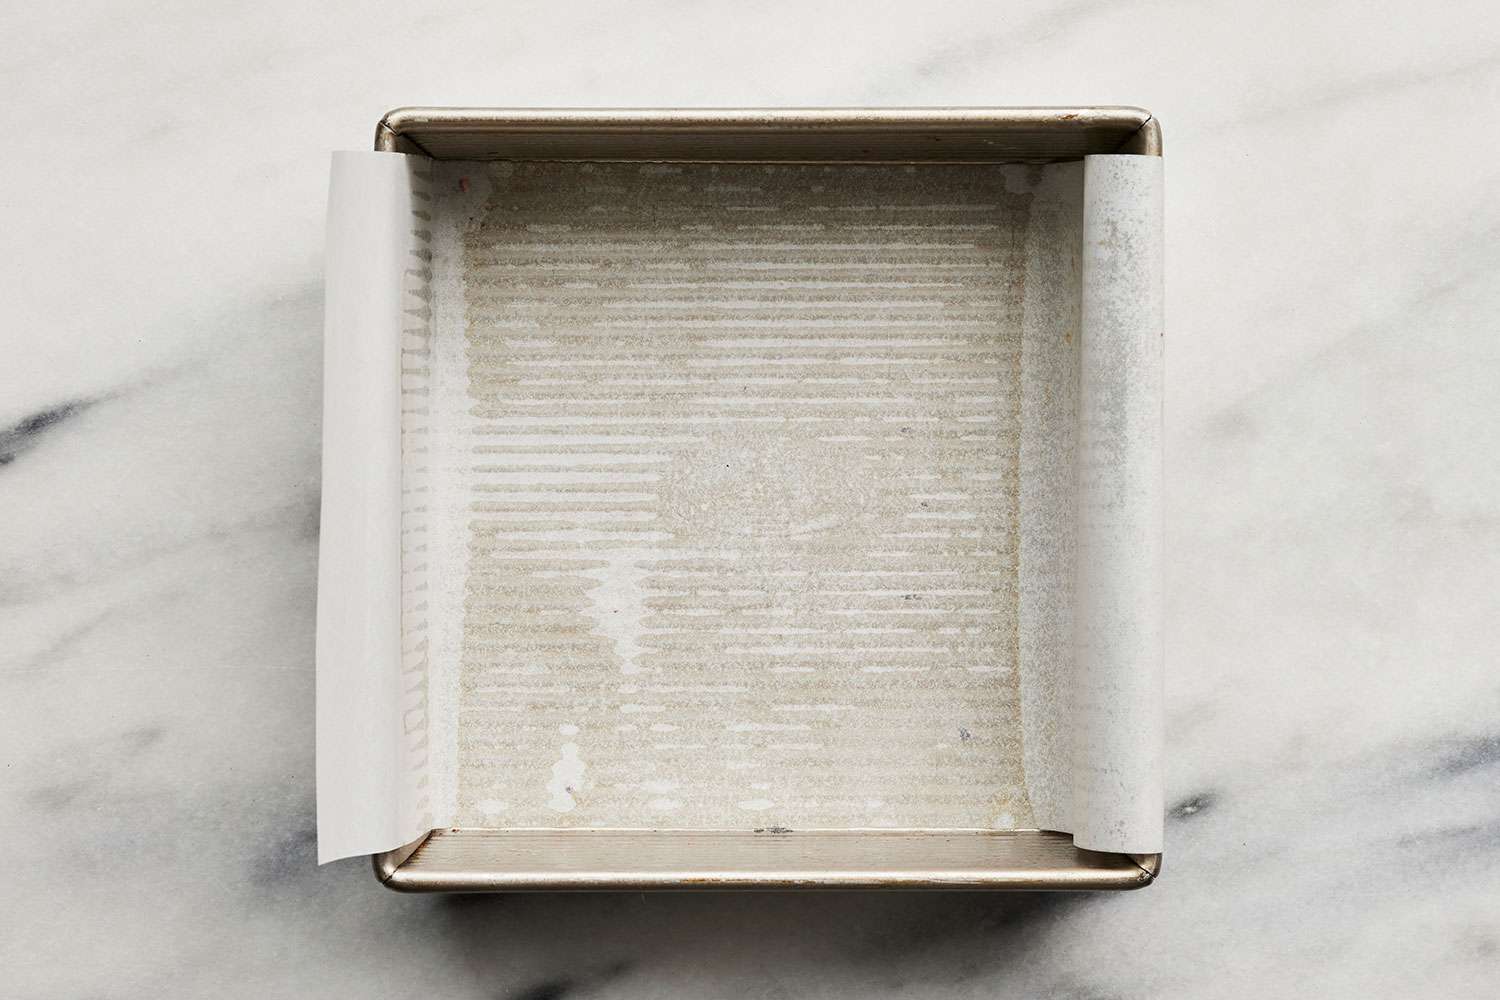 square baking pan lined with parchment paper